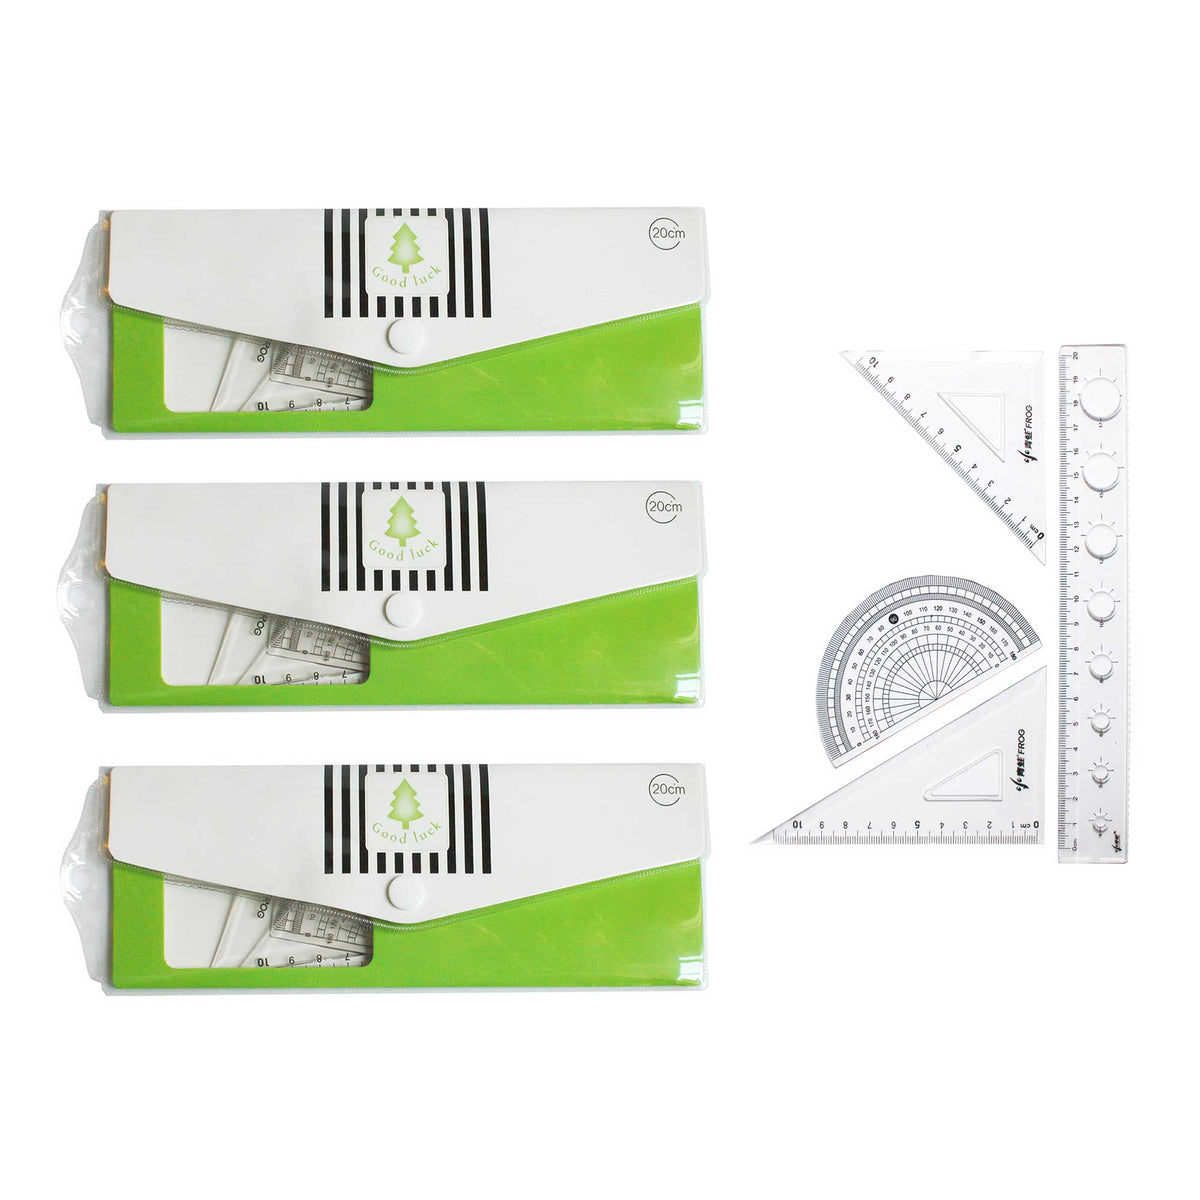 Geometry Set for Students - 20cm Ruler, Protractor, and Triangle Set (Green, Pack of 3)